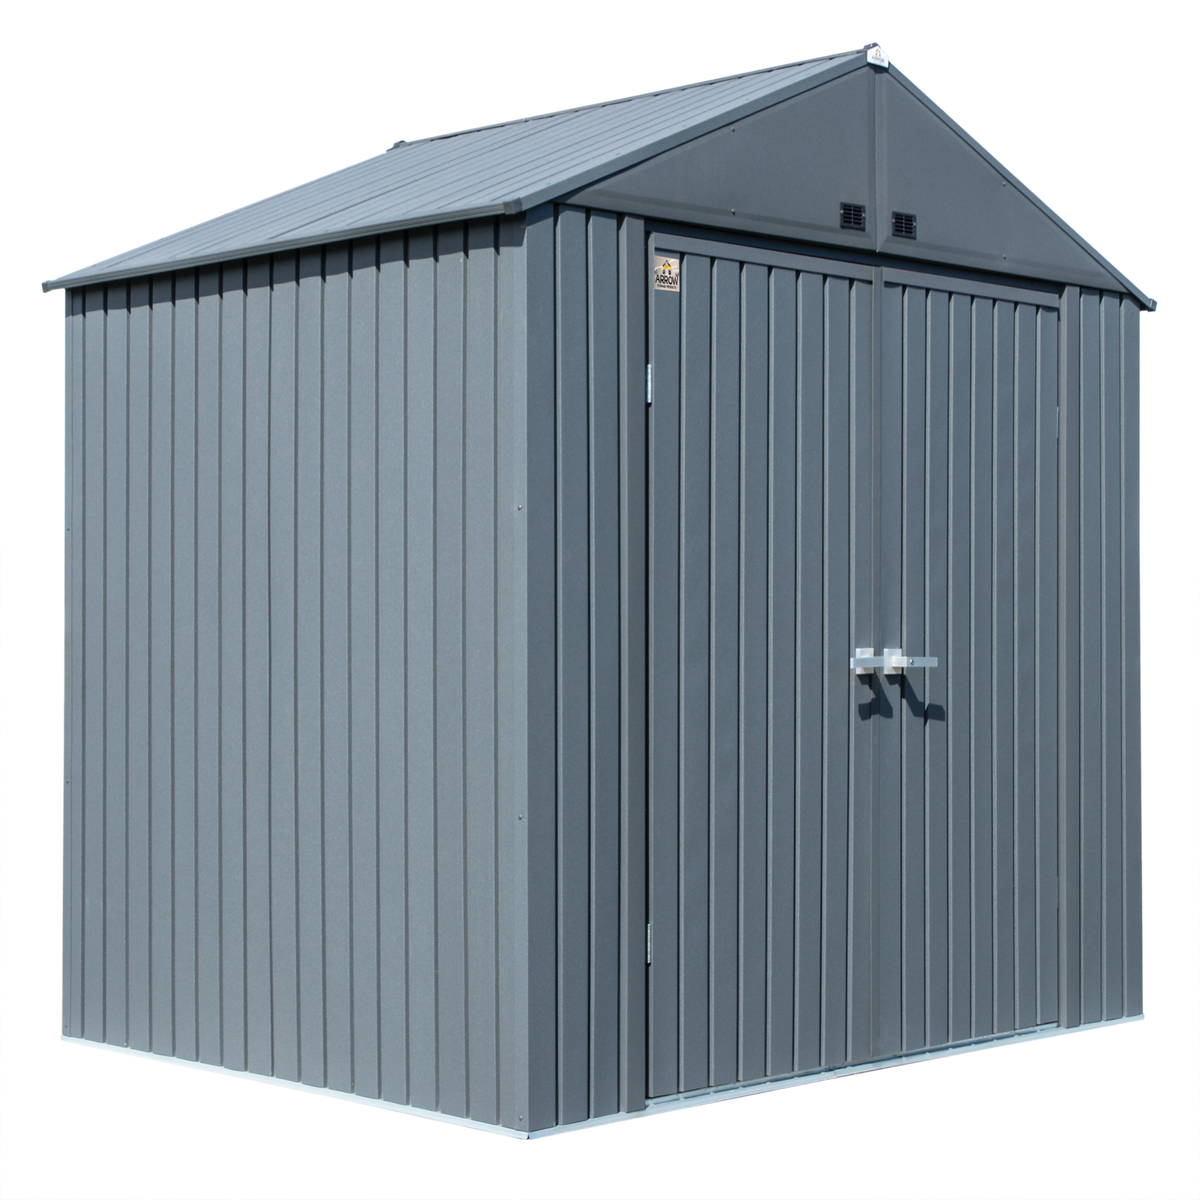 Strong Security Storage Shed 15 Year Warranty – Grizzly Shelter Ltd.